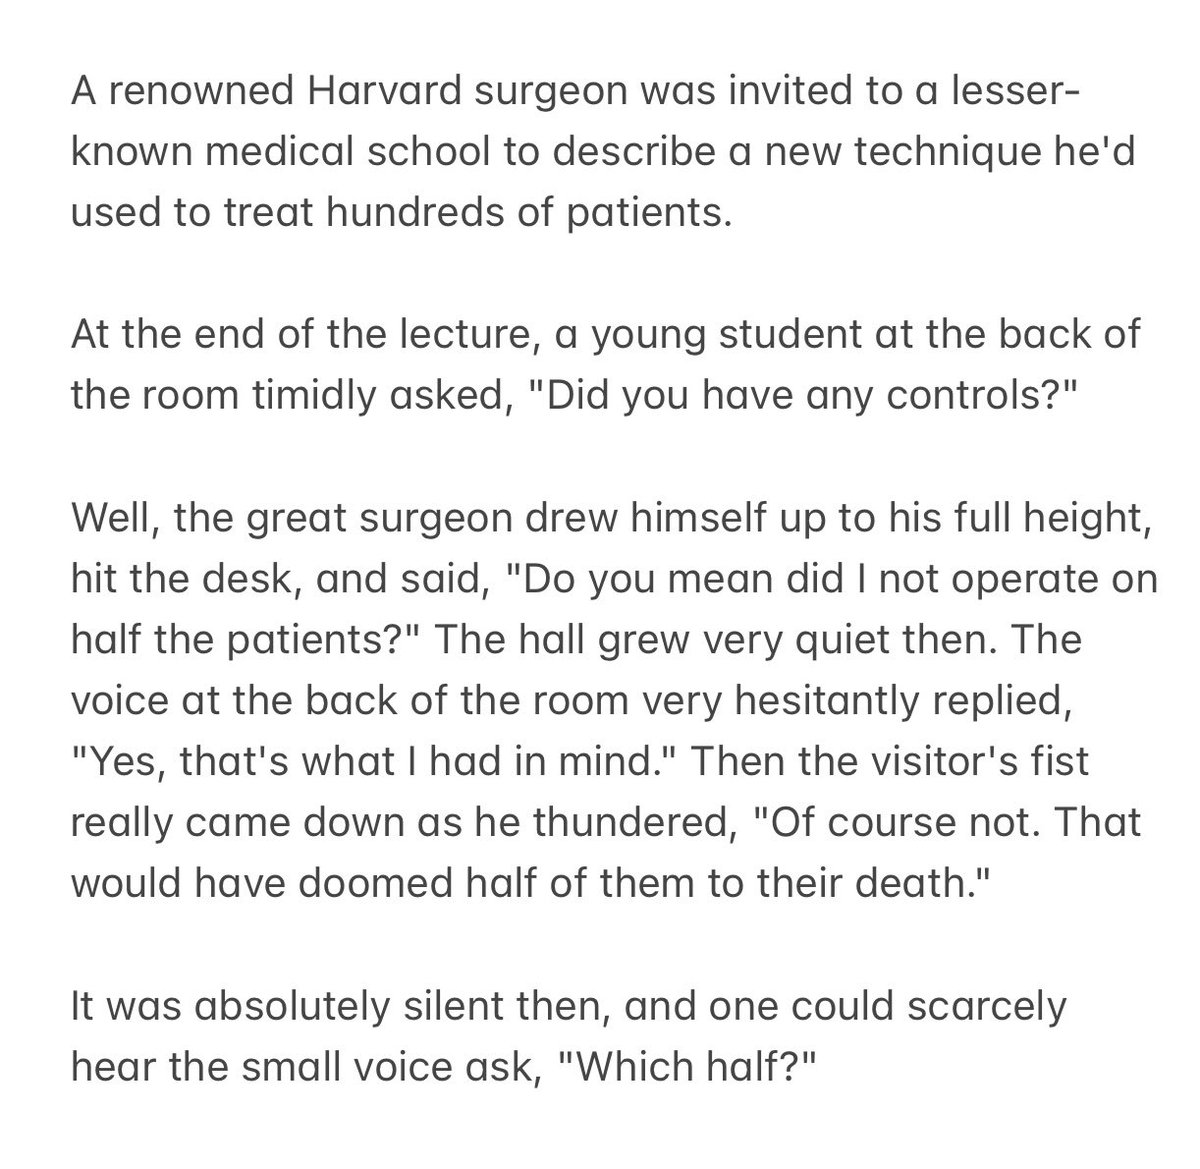 This is the greatest randomized controlled trial joke ever told